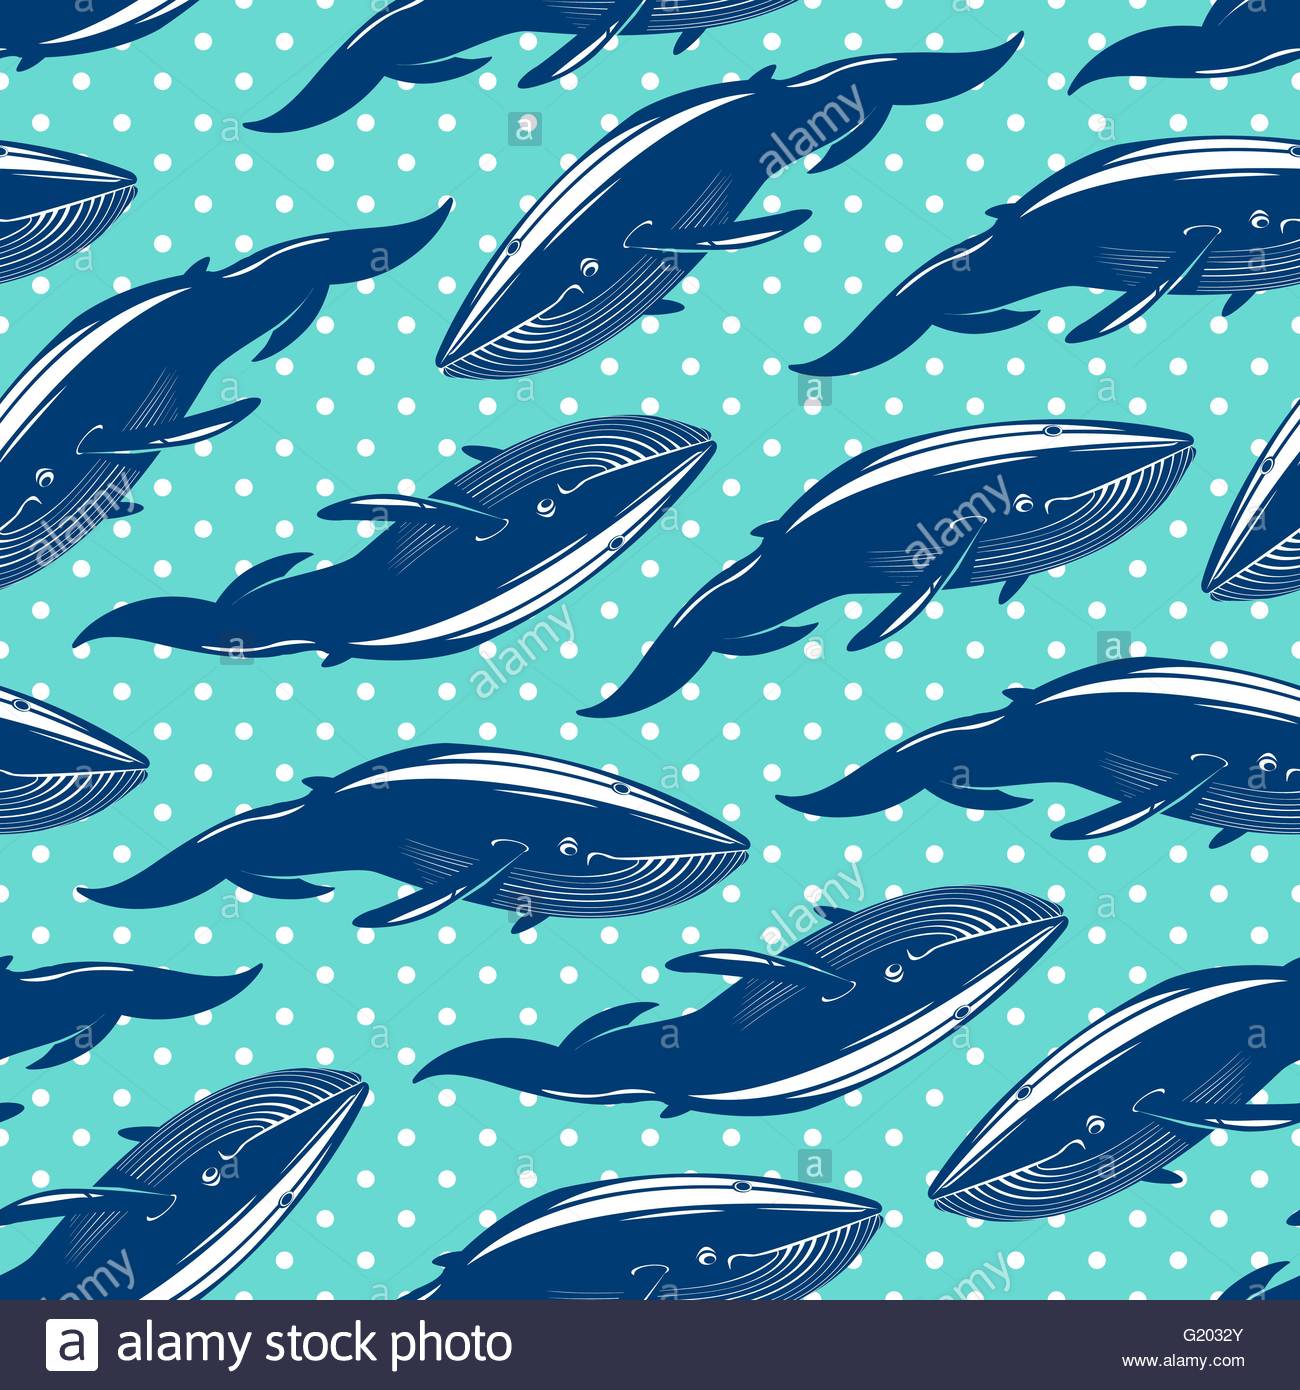 Seamless Pattern With Whales On Blue Dotted Background Stock